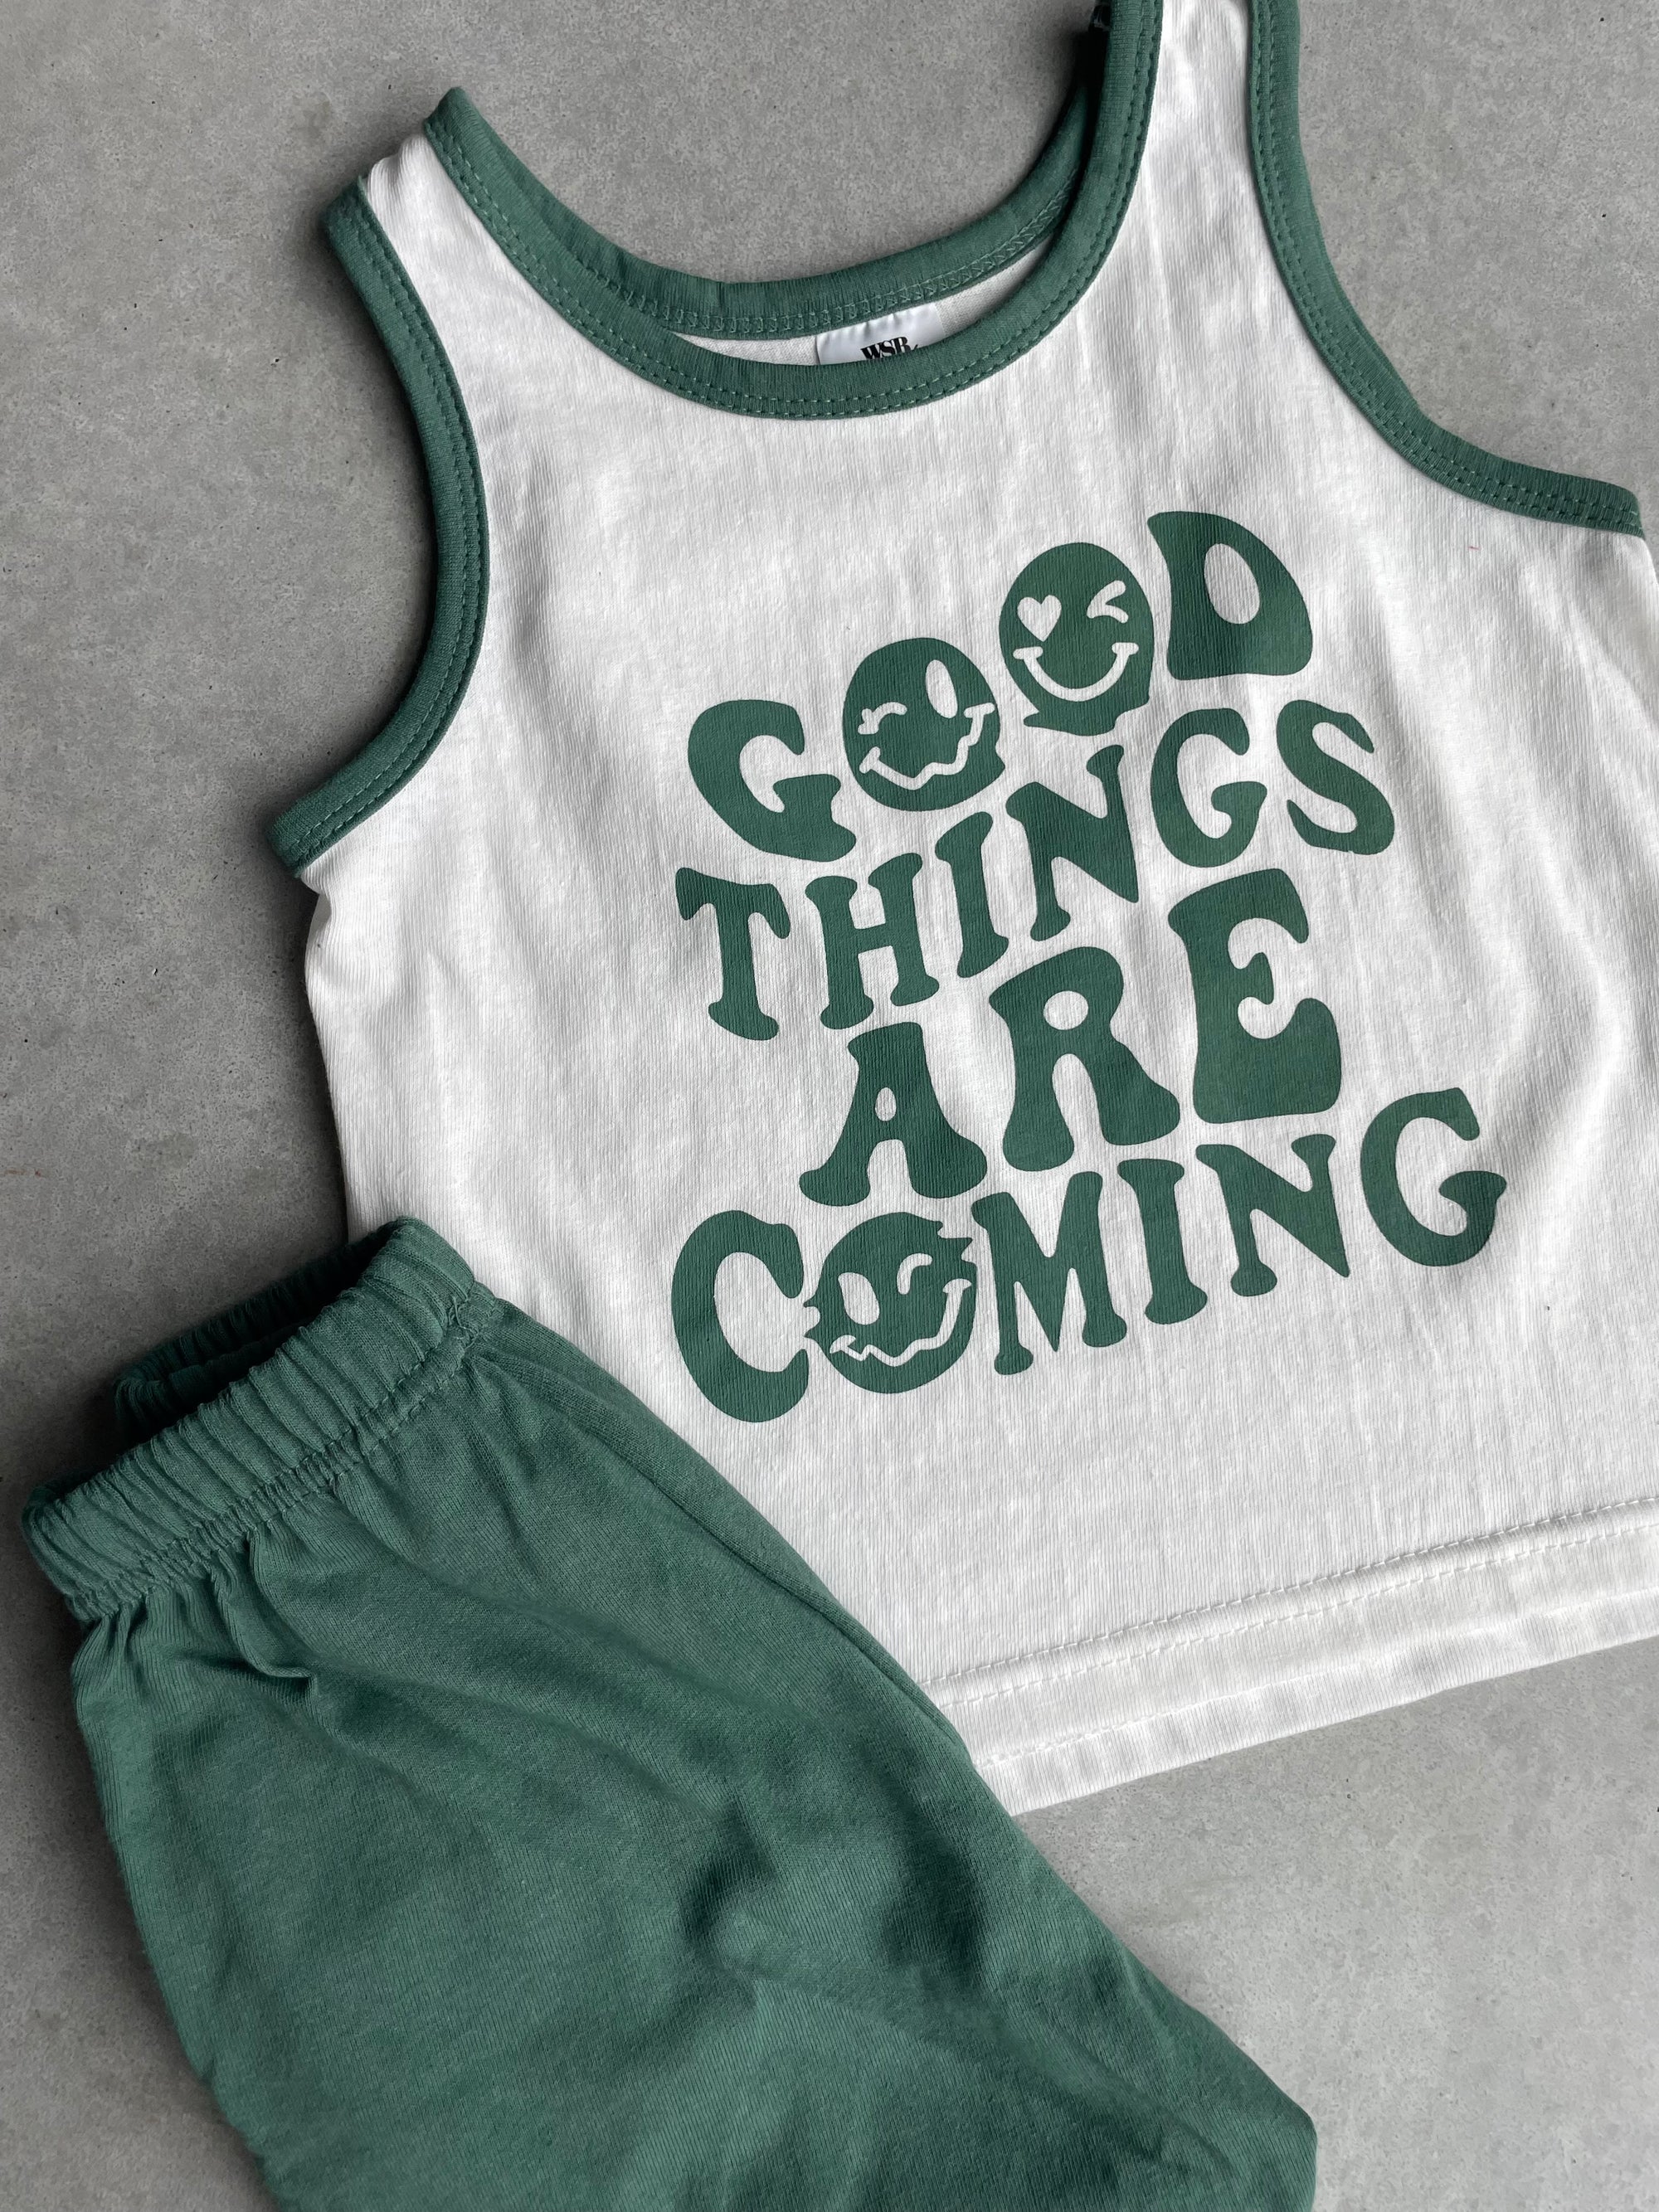 Setje good things are coming - groen